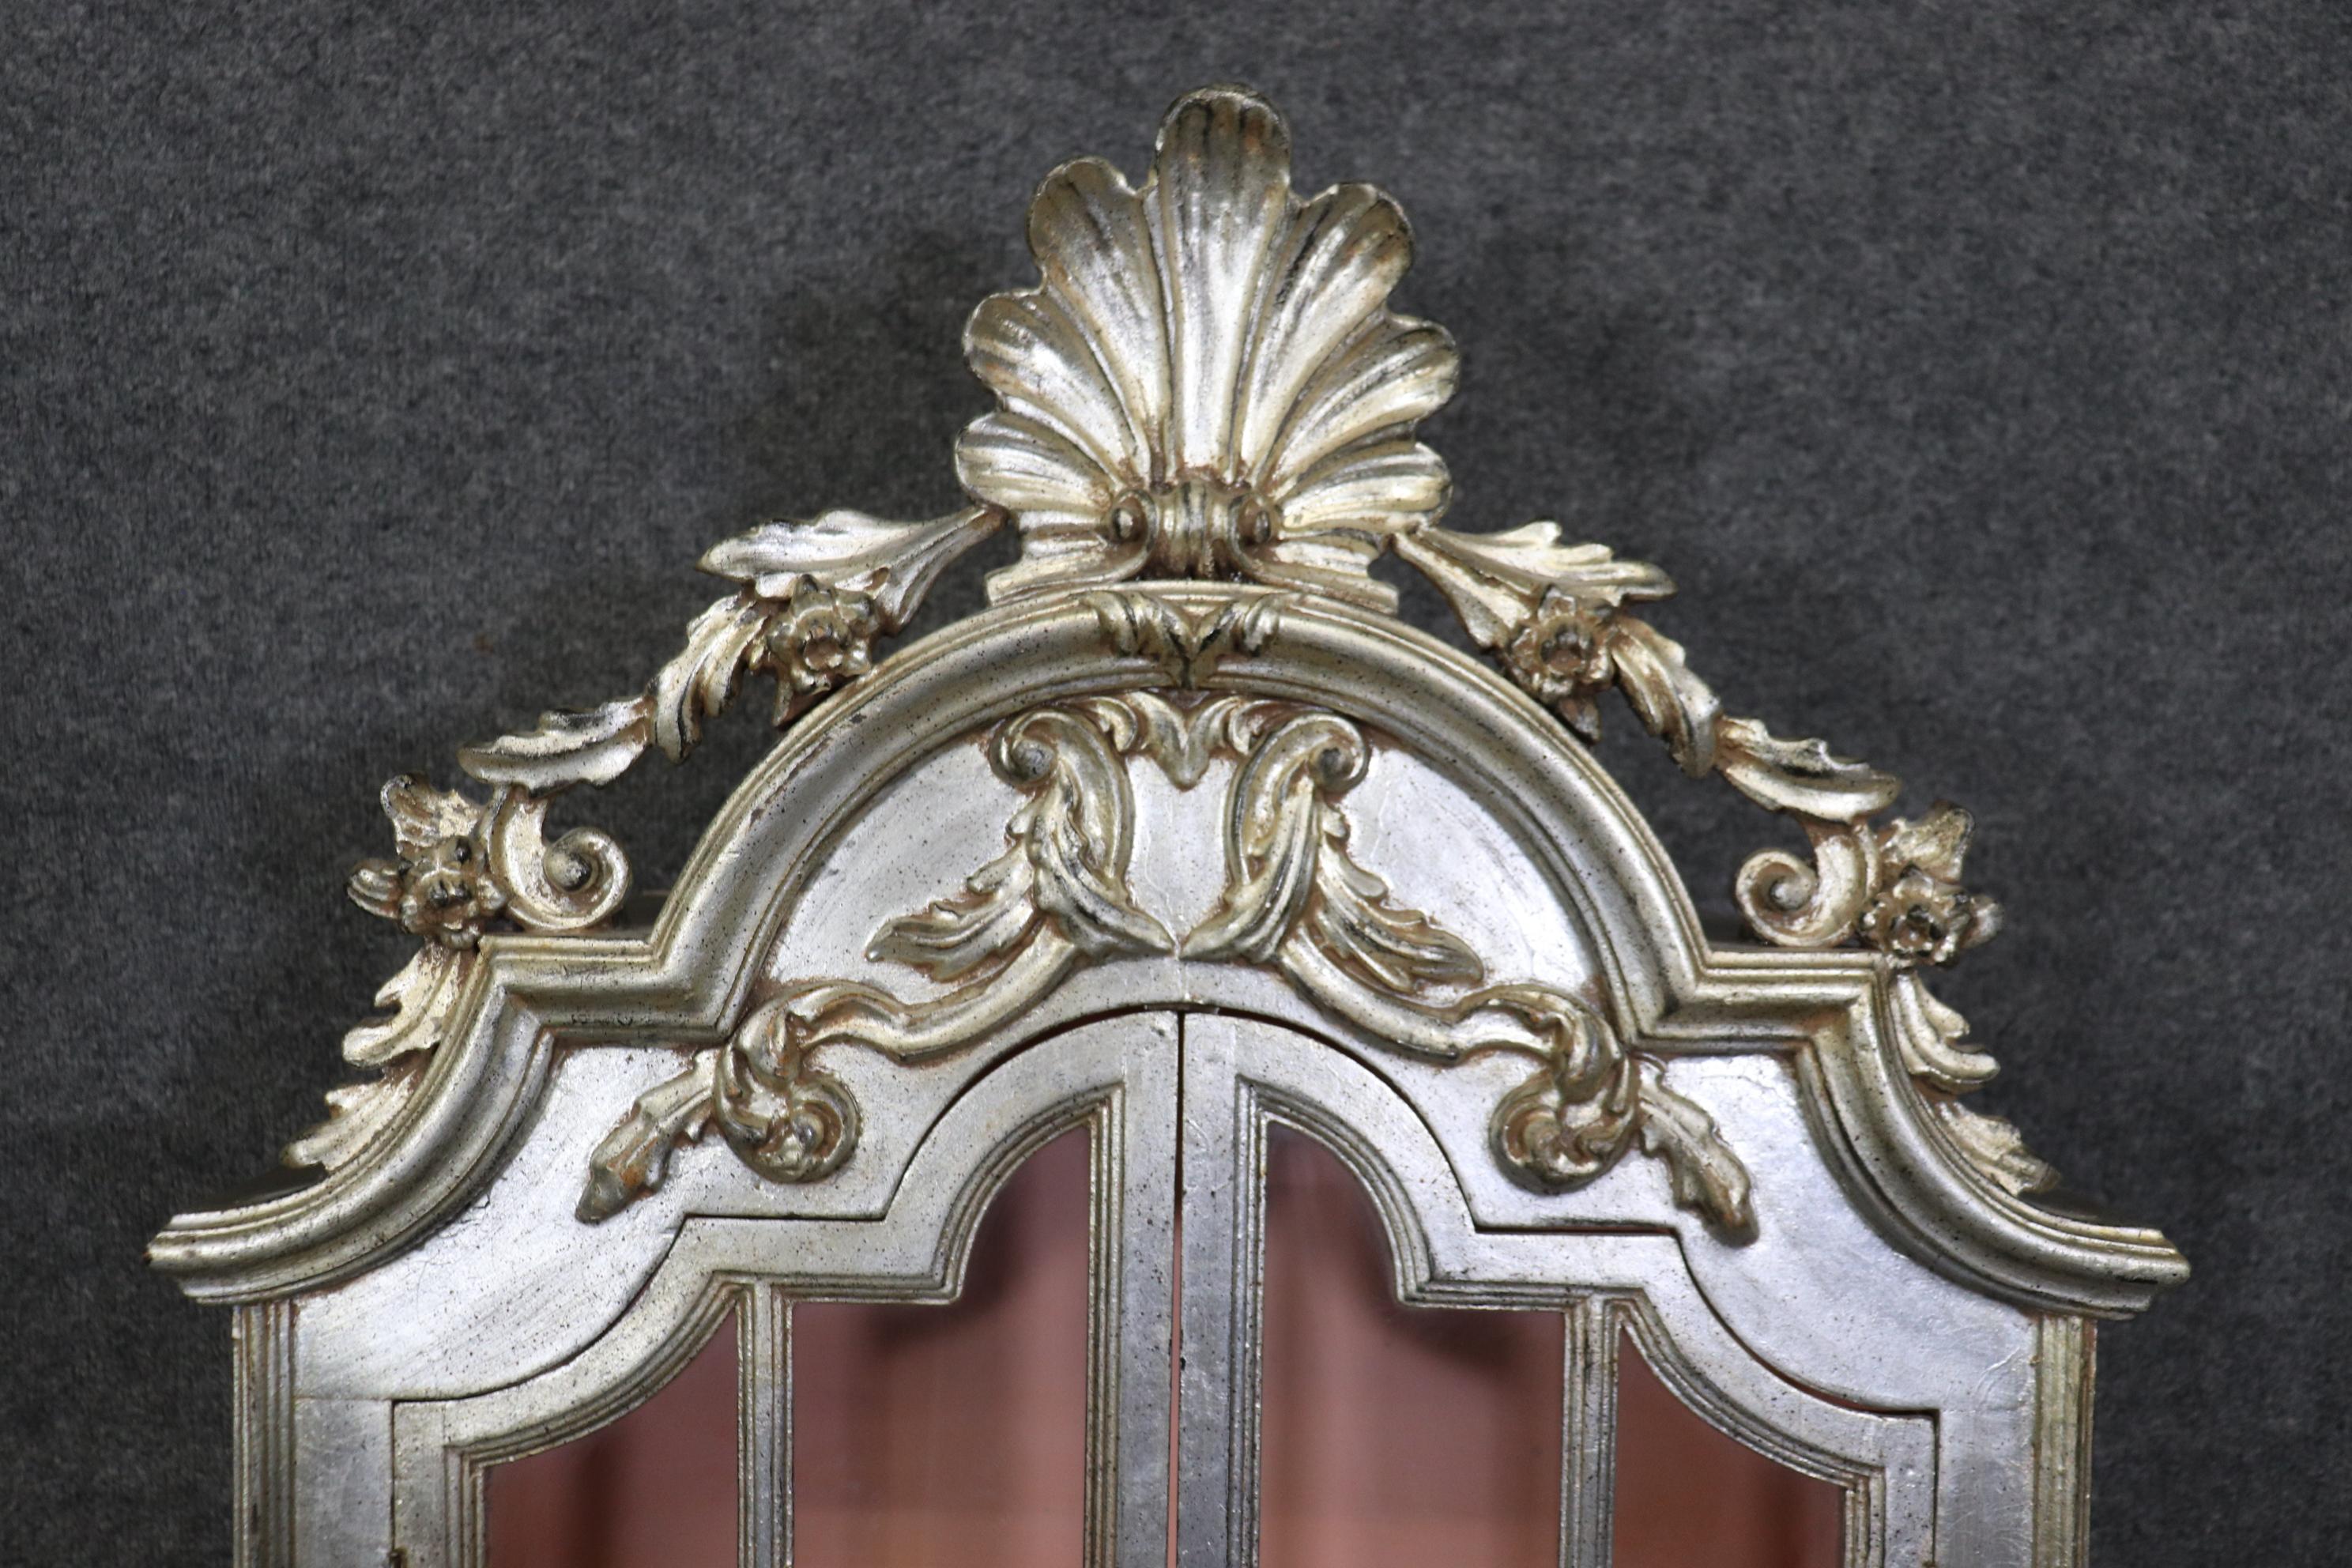 Italian Rococo Style Silver Gilt Wall Hanging Etagere Shelf by Labarge 1